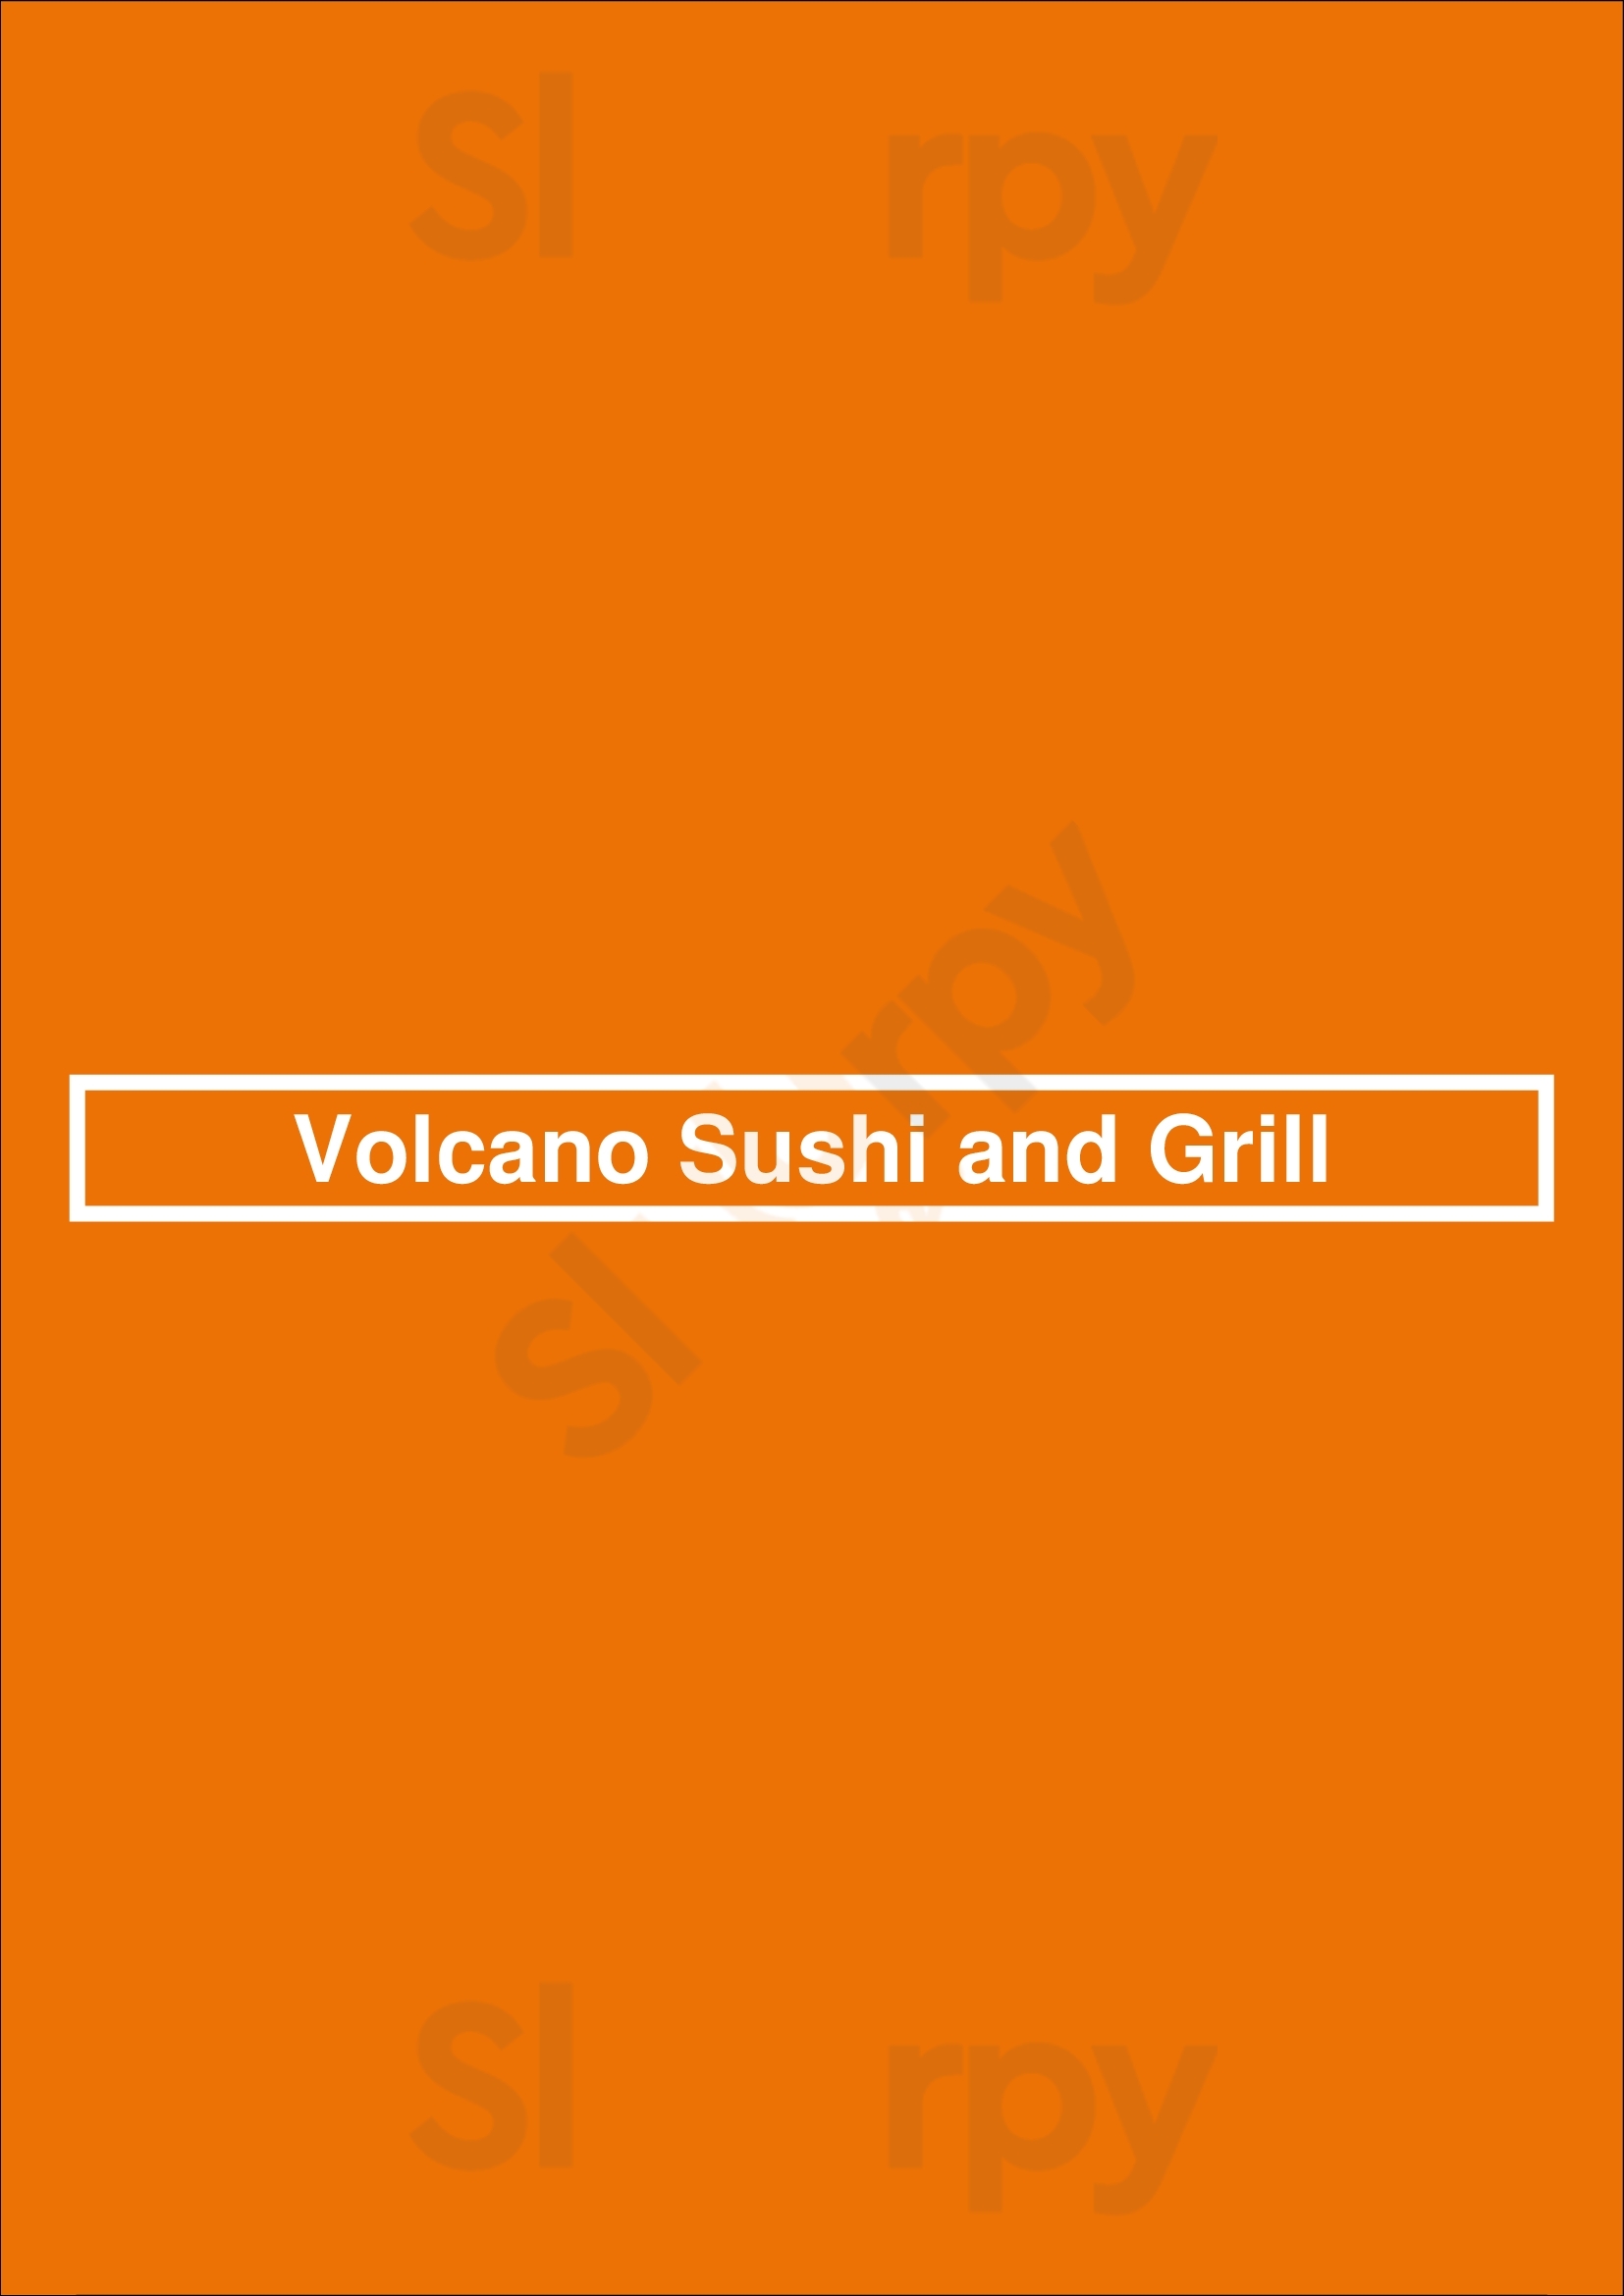 Volcano Sushi And Grill Vancouver Menu - 1